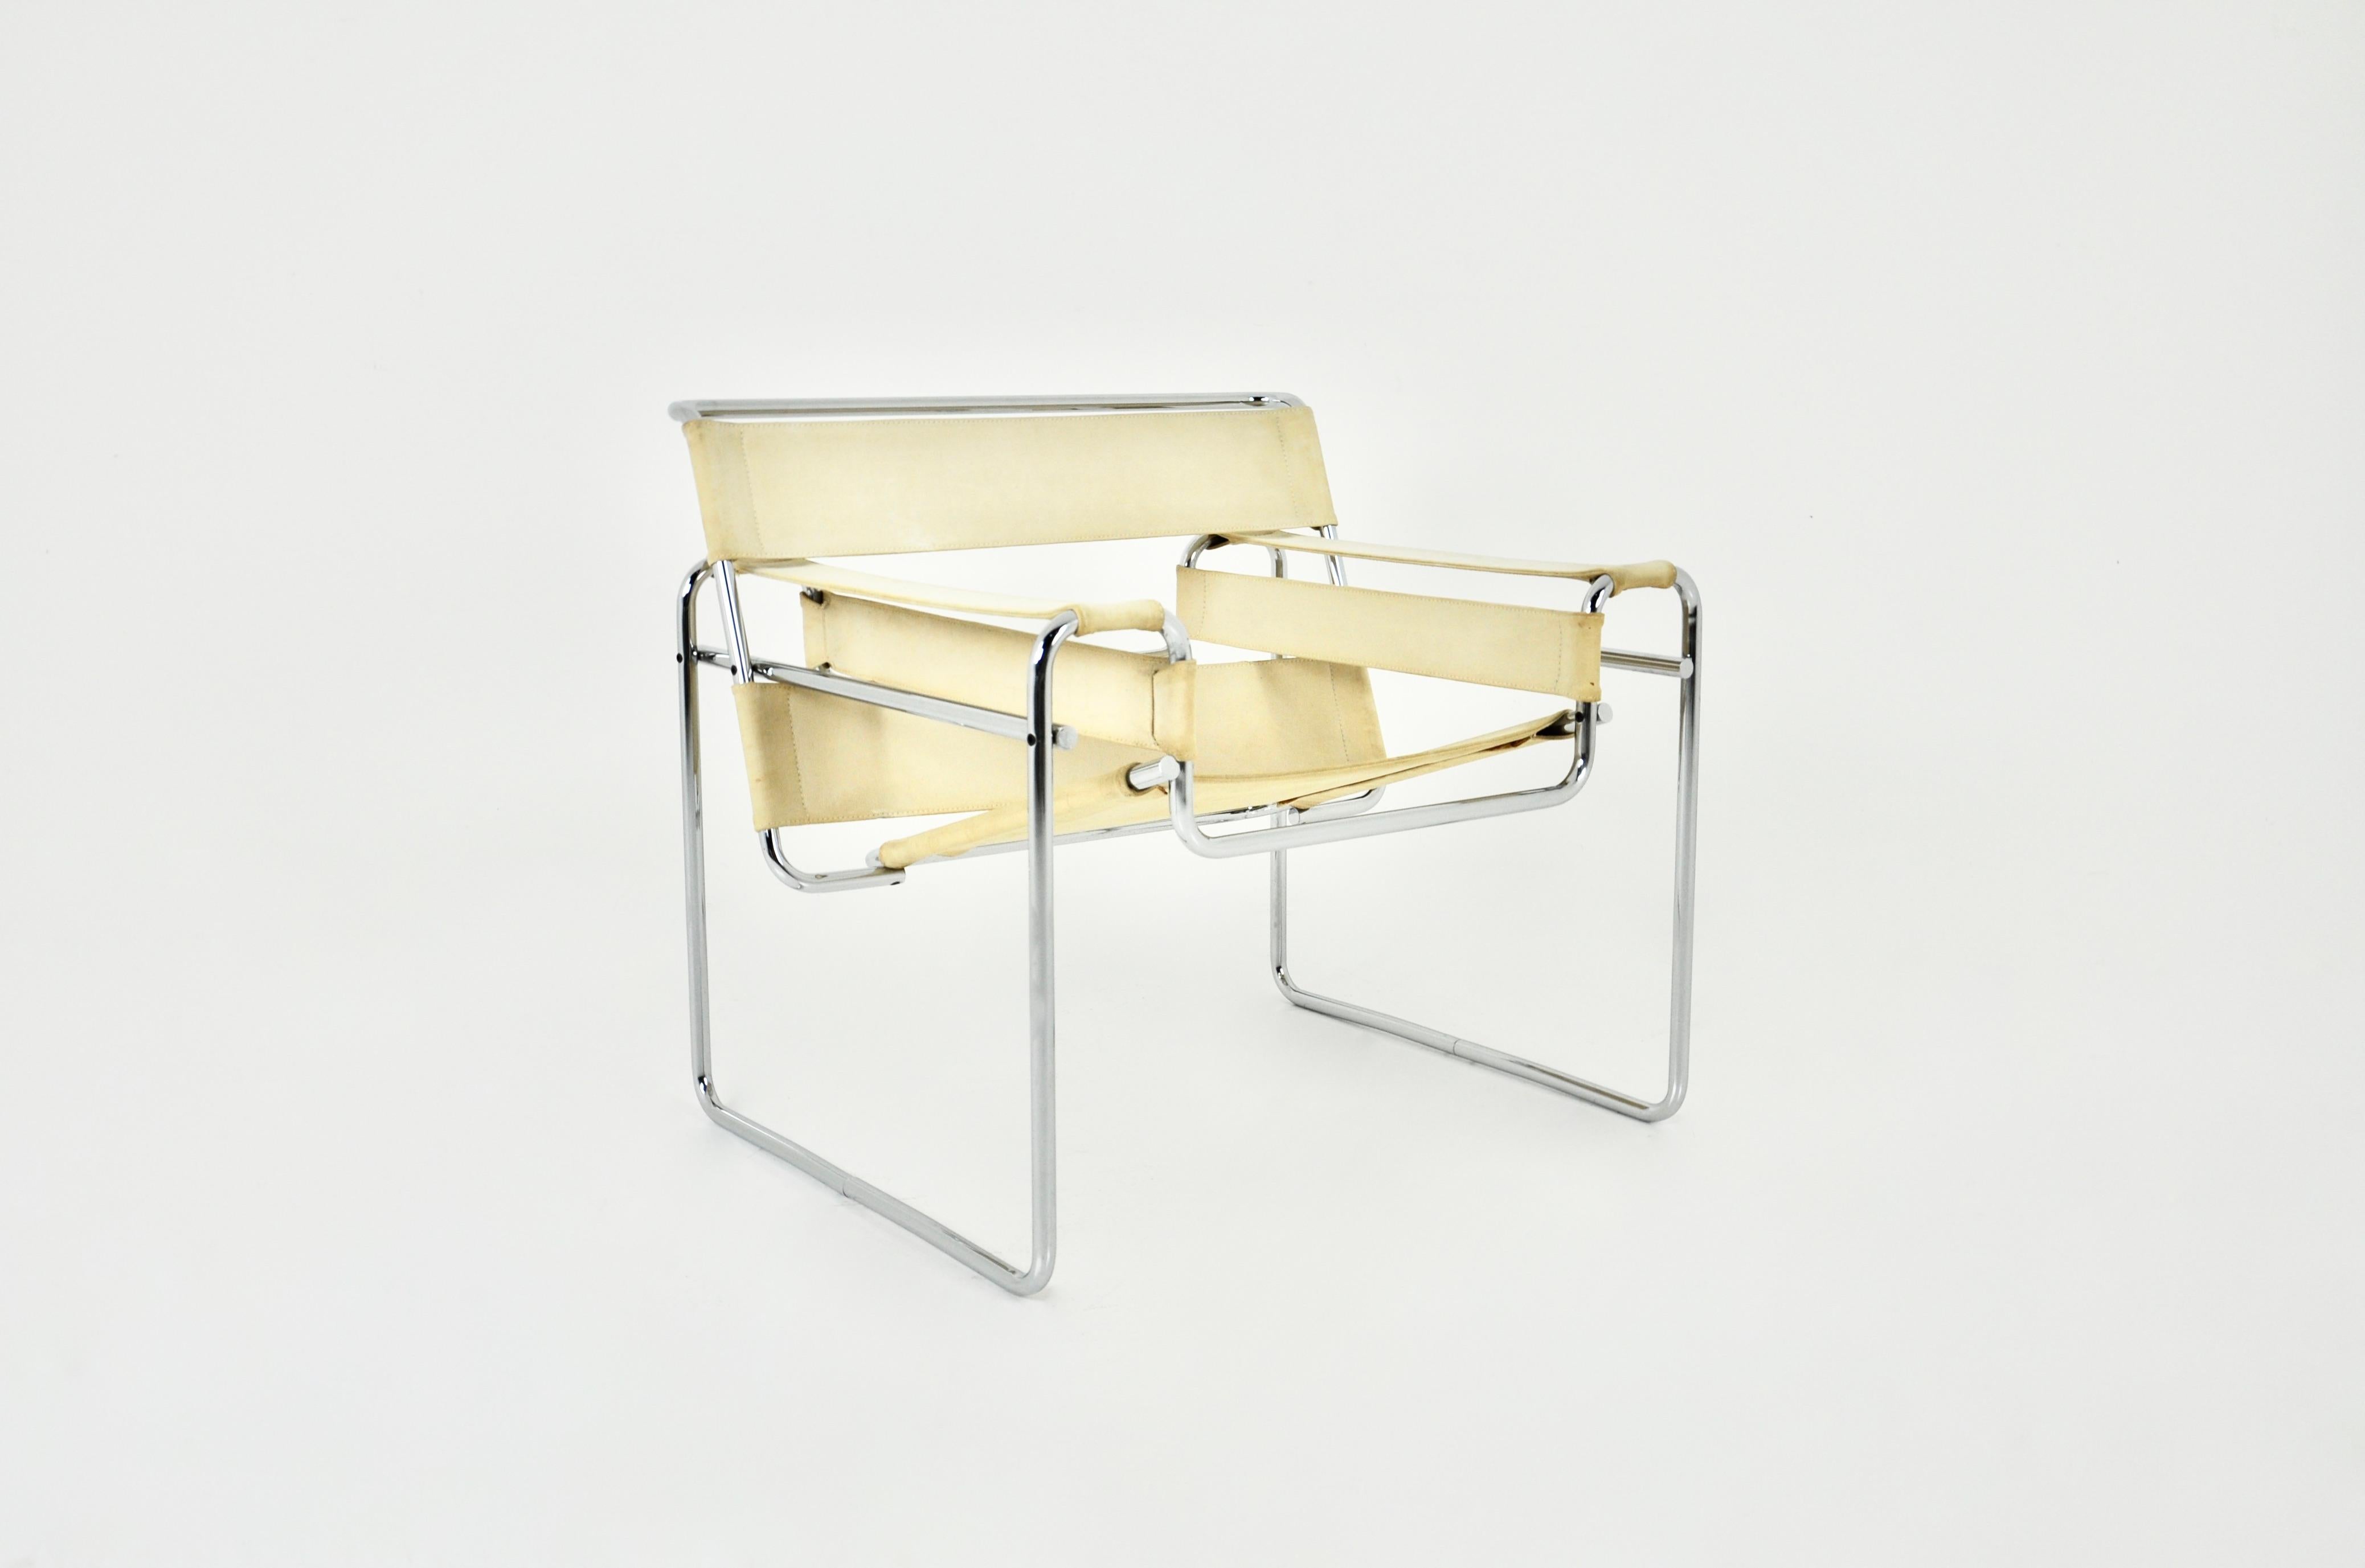  Armchair in Chromed metal and cream fabric. Seat height: 43 cm. wear due to time and age of the chair.